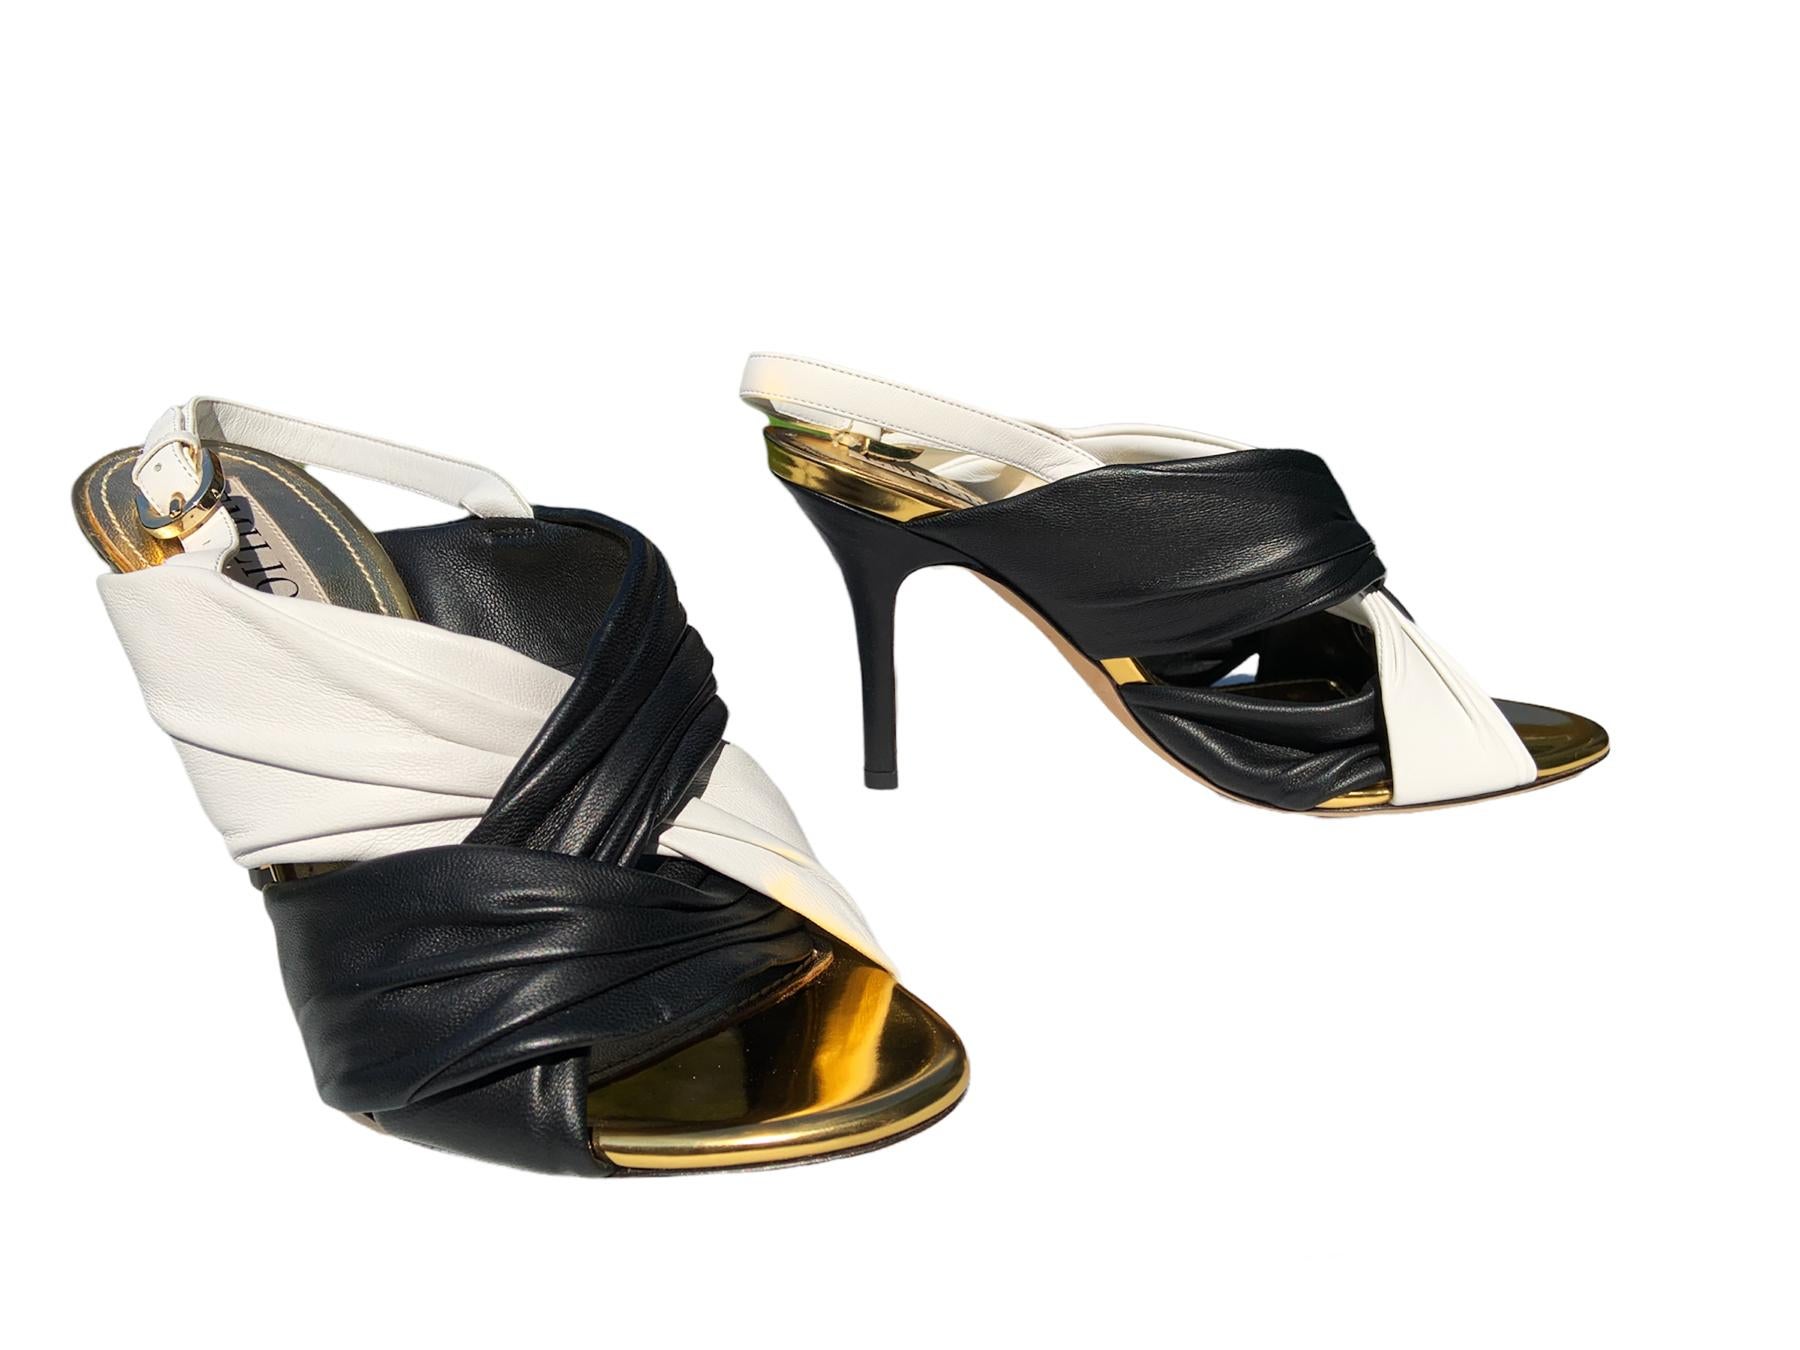 New Emilio Pucci Leather Slingback Sandals
Italian size 36 - US 6
Two Tone Classic White & Black Colors, Gathered Soft Leather, Gold Tone Leather Lining, Gold Tone Hardware, Leather Sole.
Black Leather Covered Heel Height - 3.5 inches
Made in